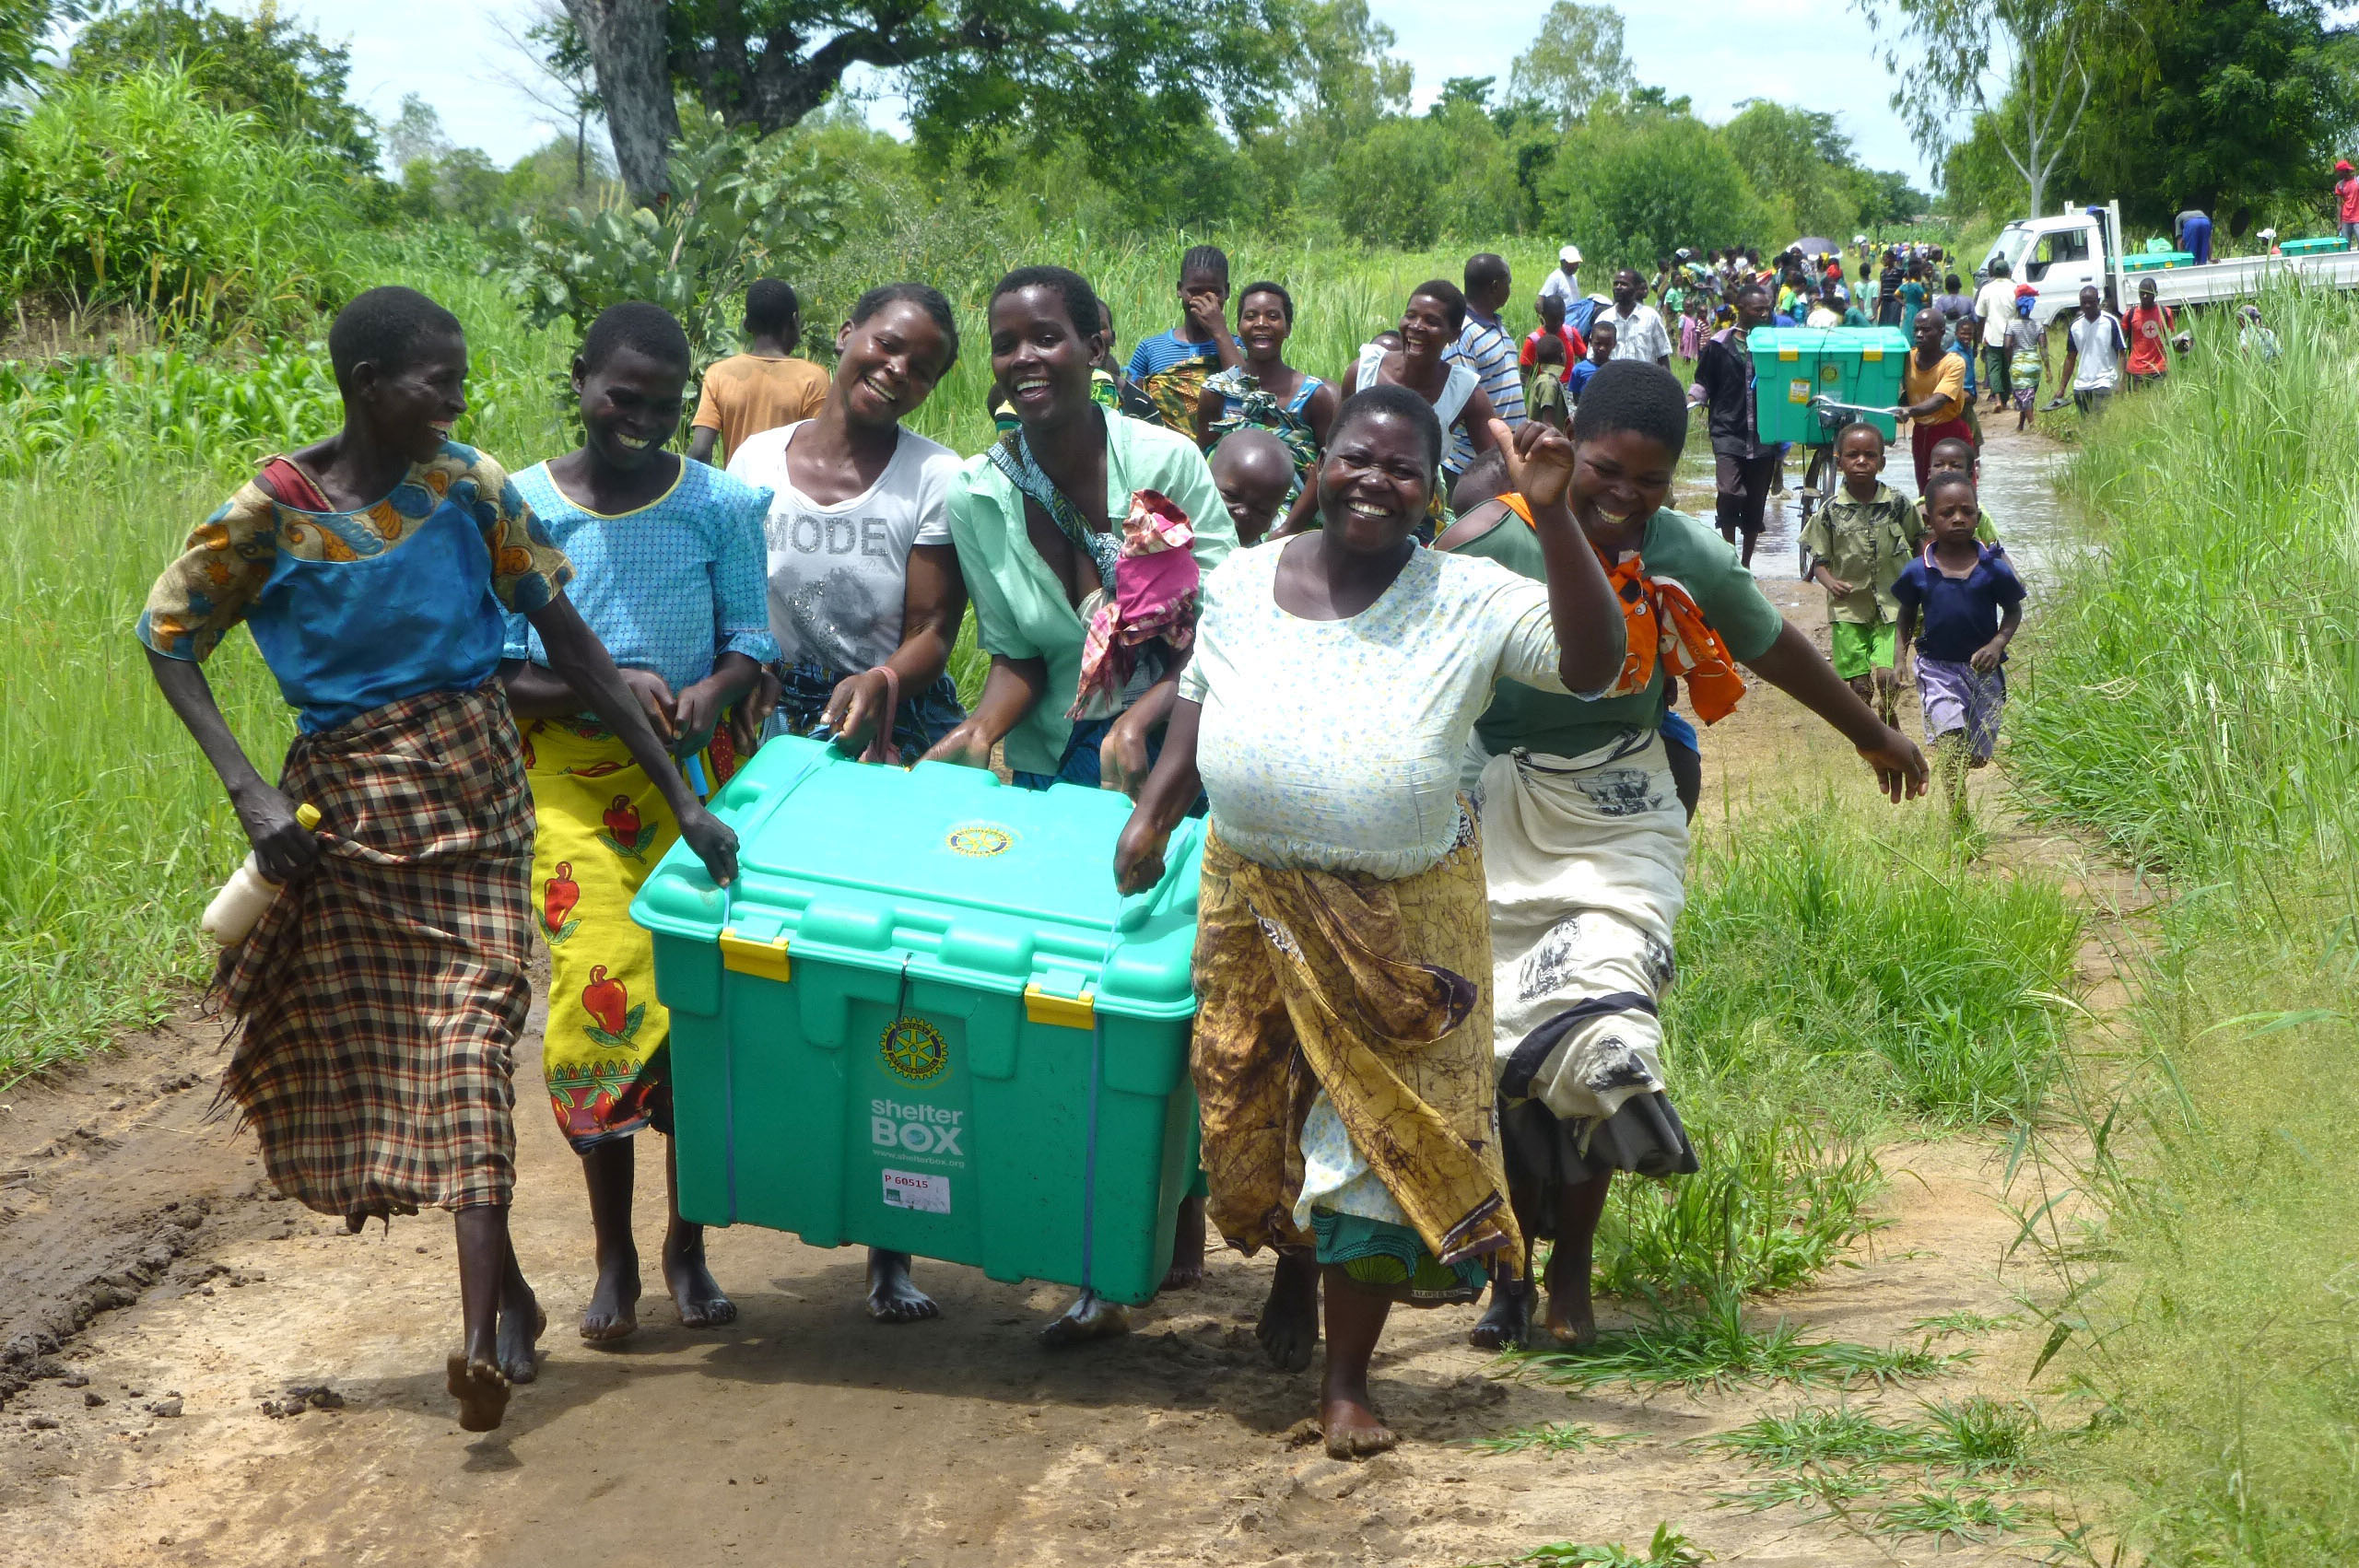 Malawians receiving Shelterboxes